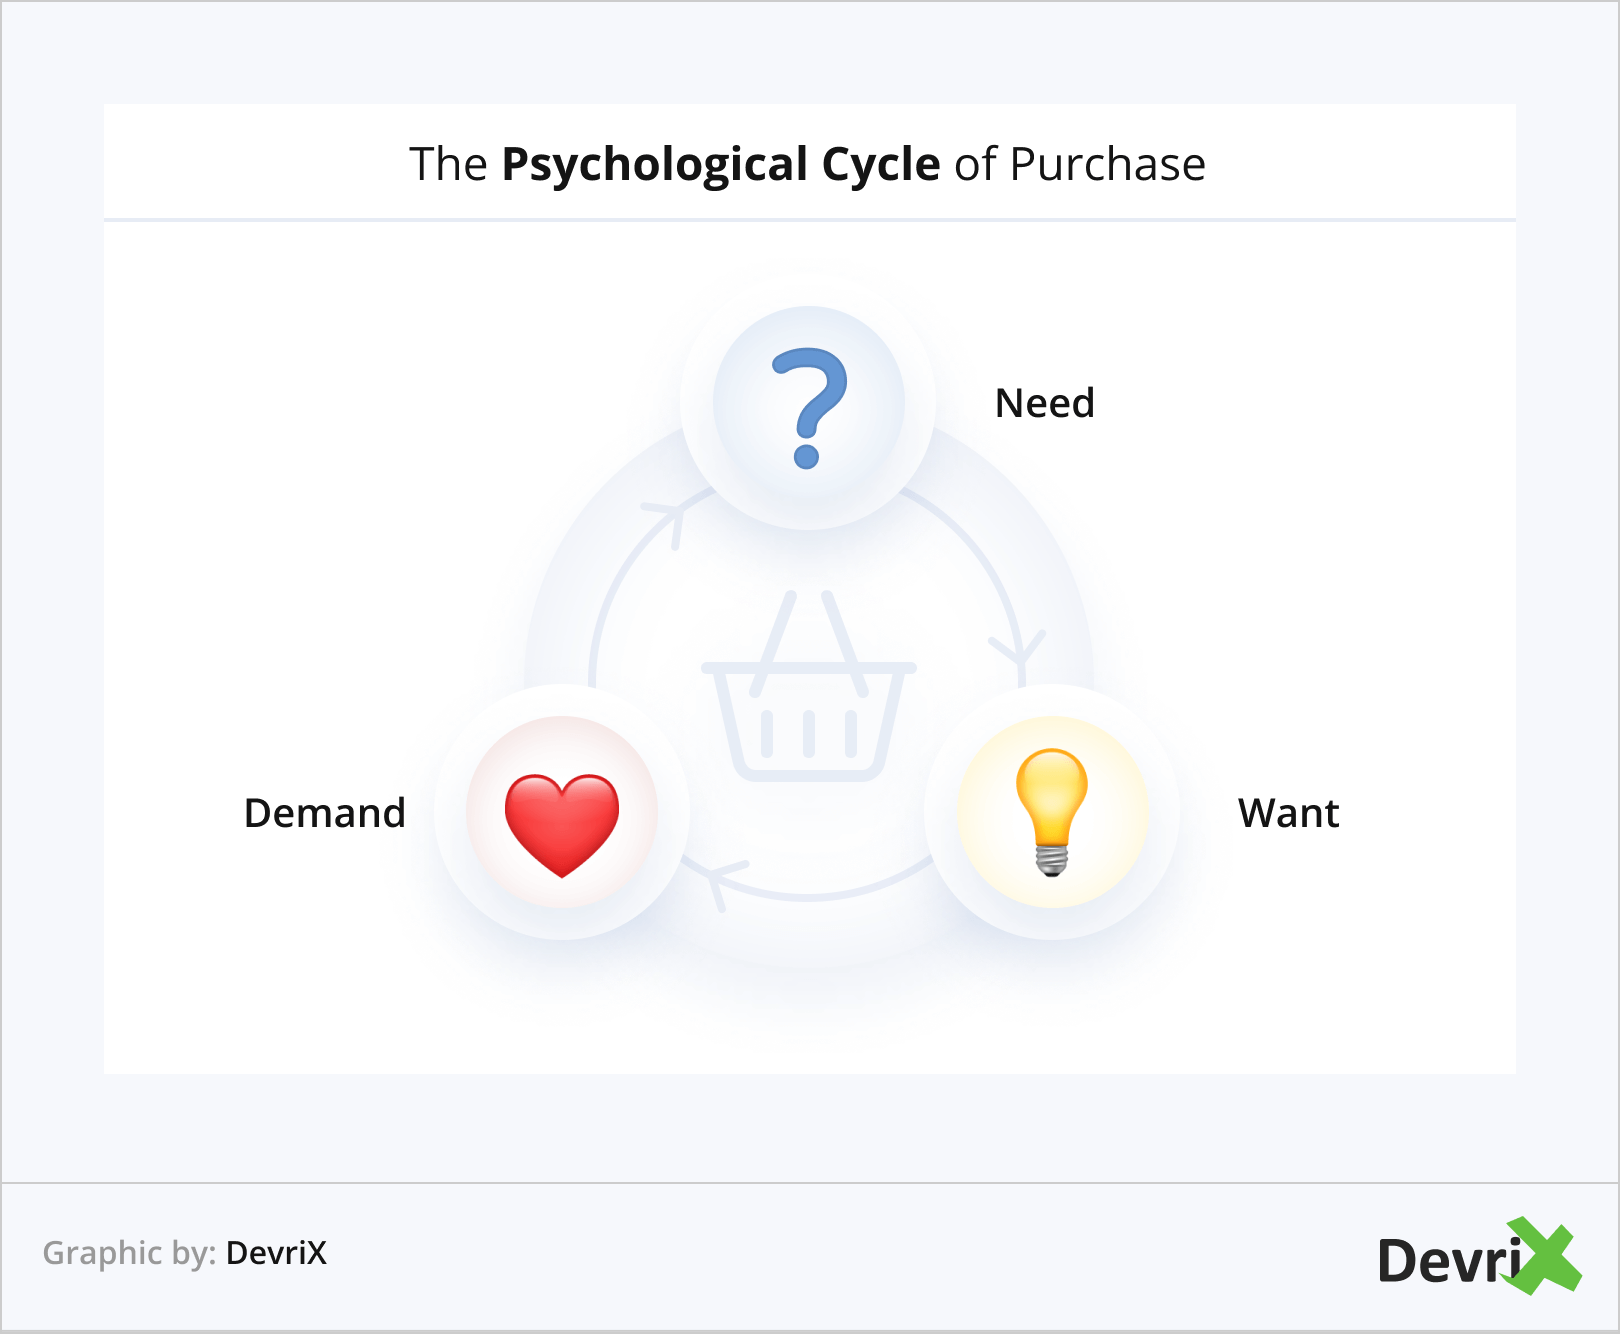 The Psychological Cycle of Purchase